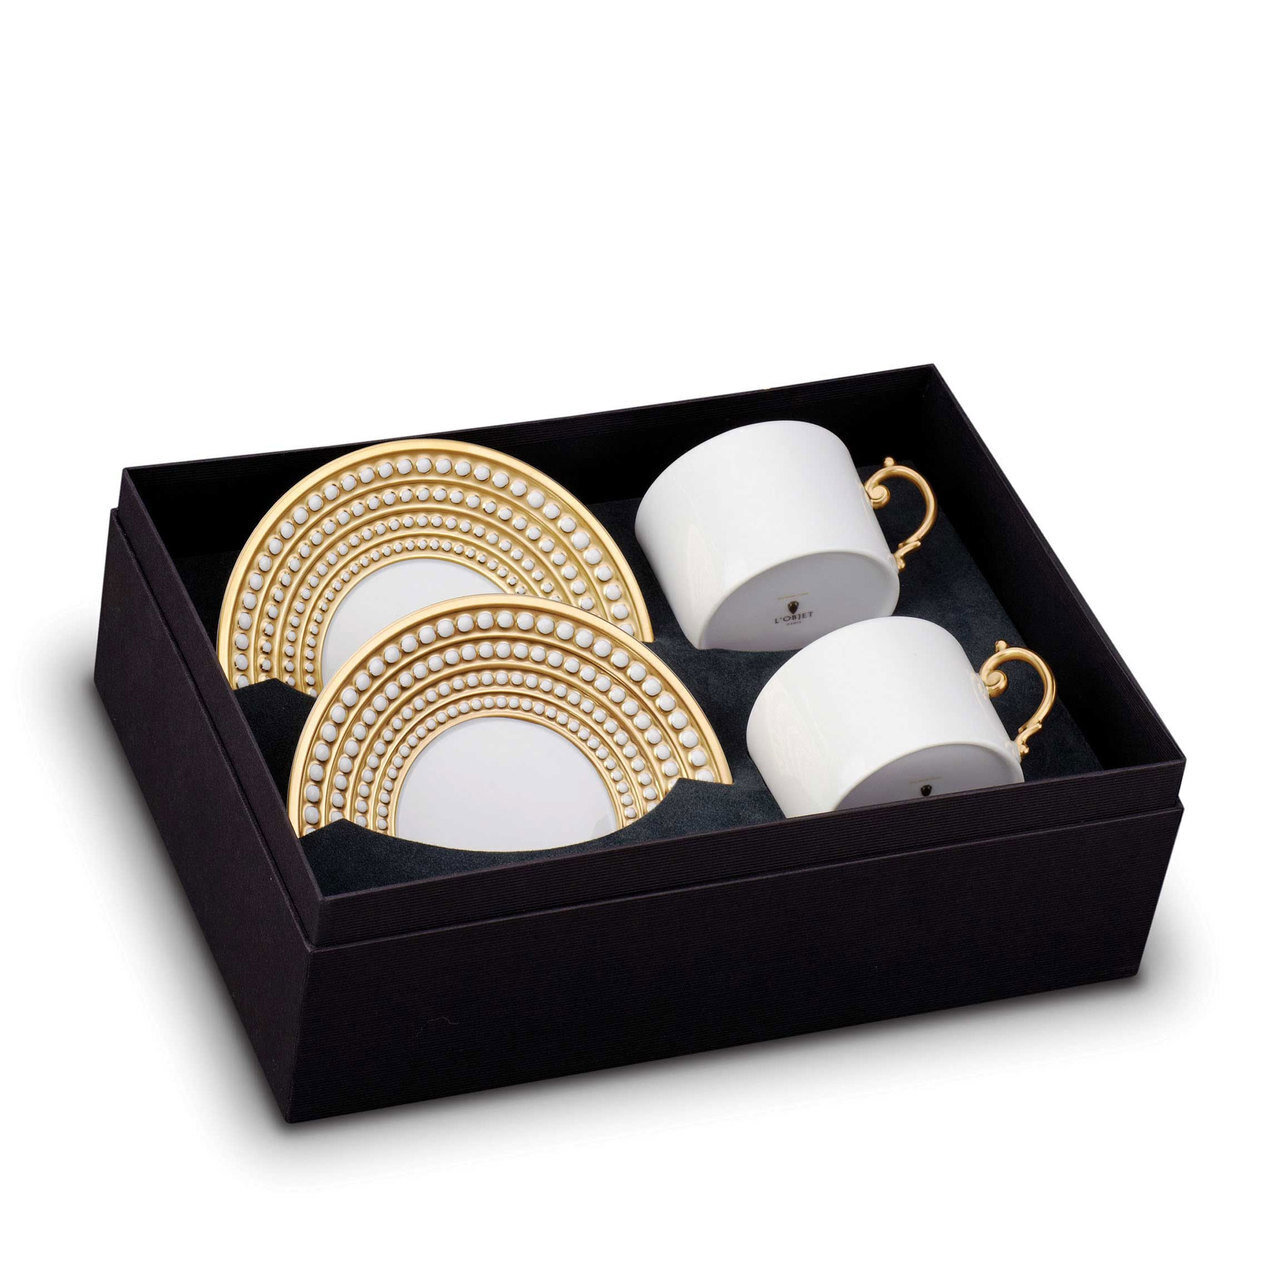 L'Objet Perlee Tea Cup and Saucer Gift Box of 2 Gold